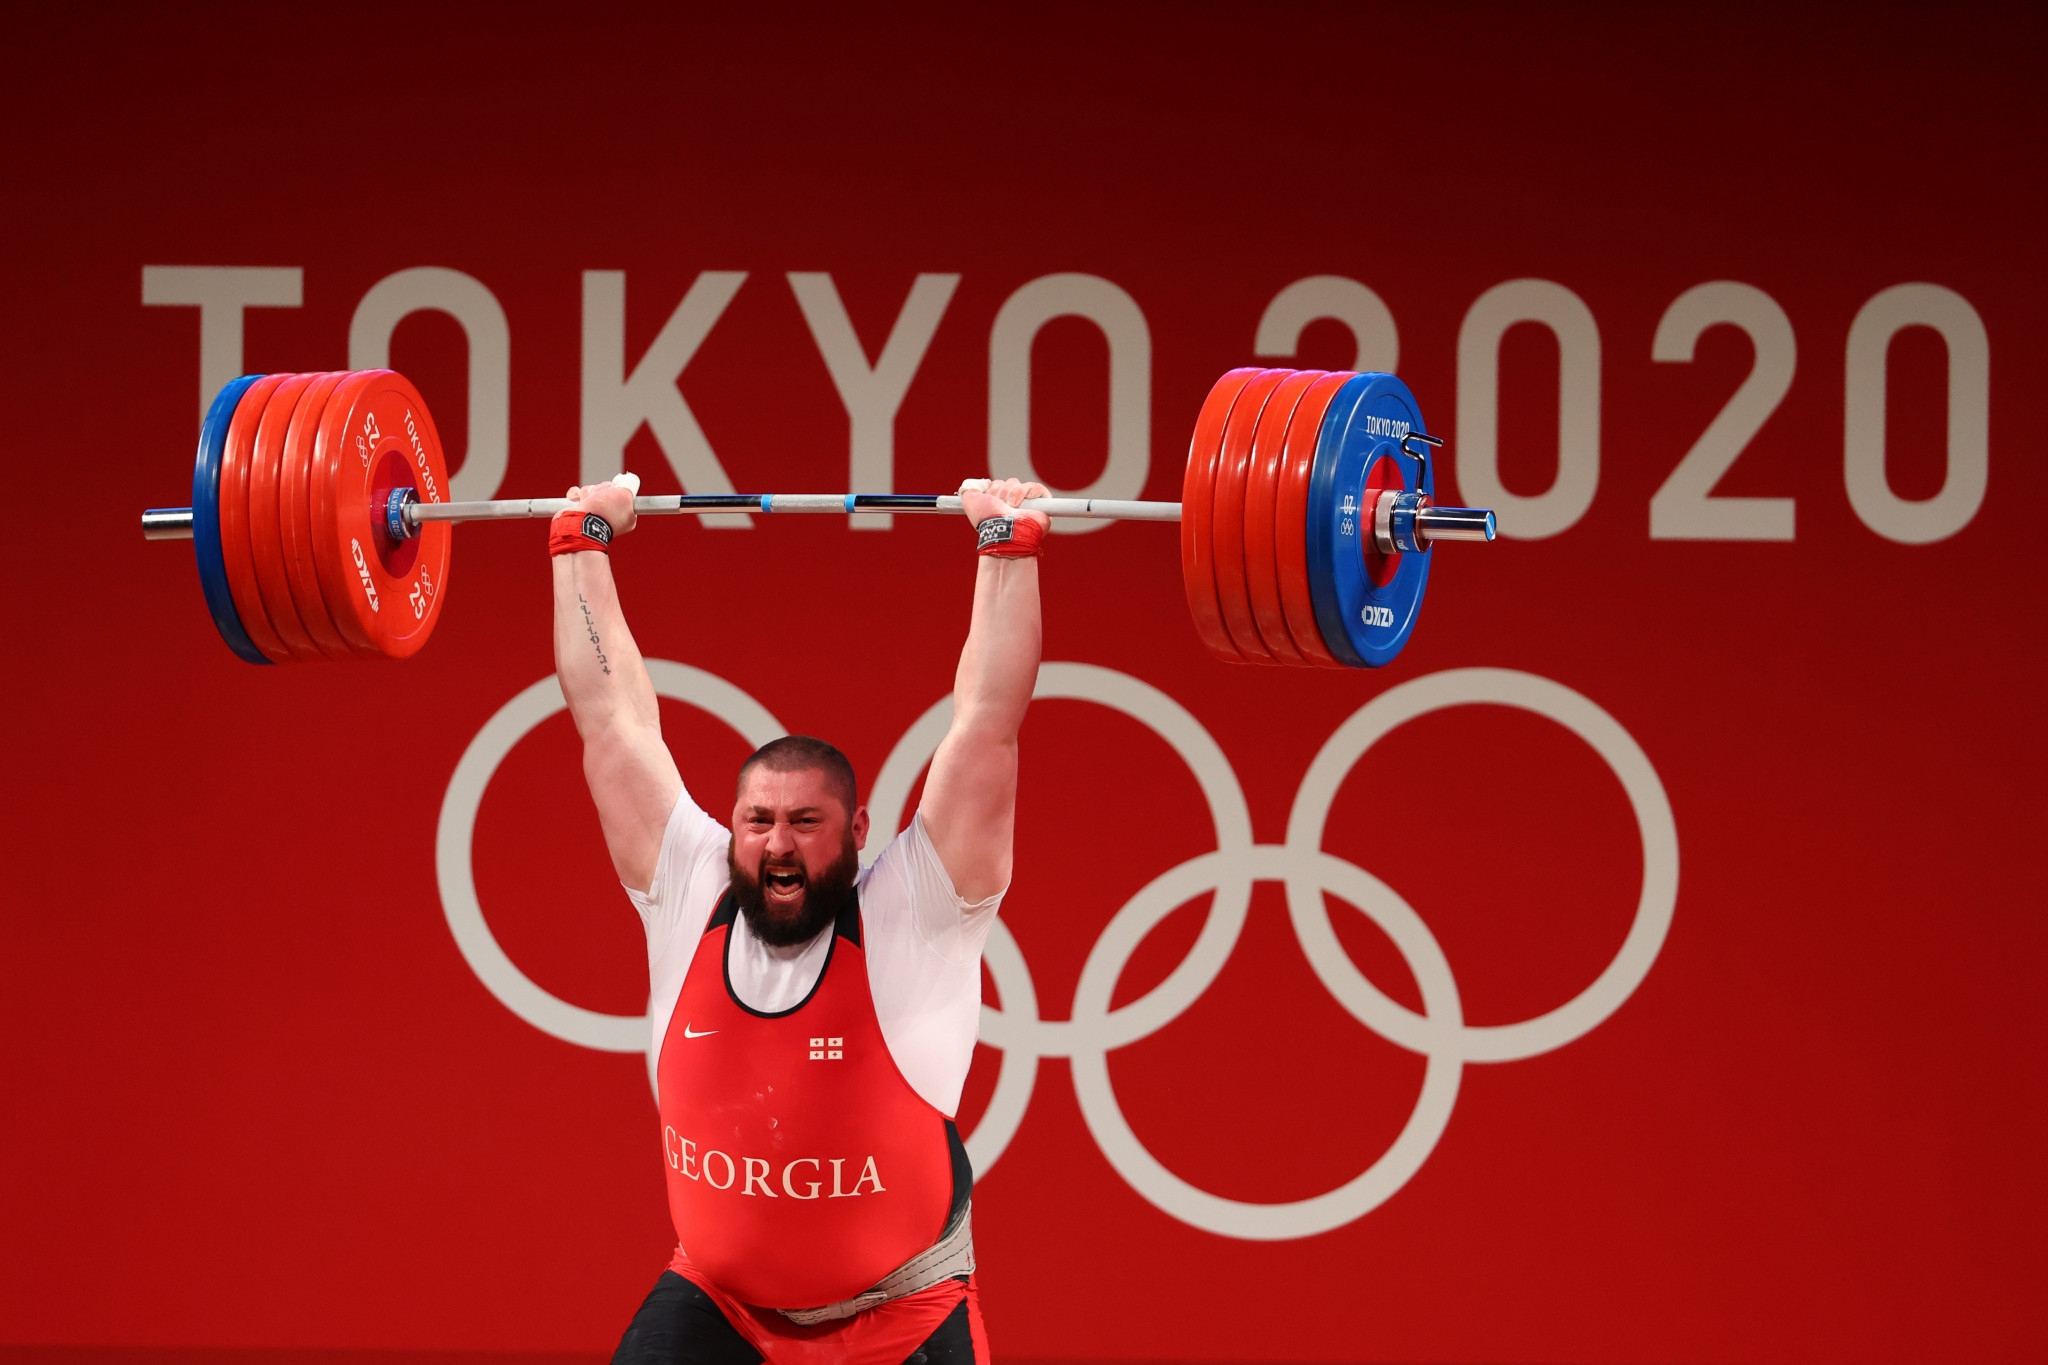 Georgia's Lasha Talakhadze won what could be the last Olympic weightlifting gold medal, with the sport's Paris 2024 place in doubt ©Getty Images